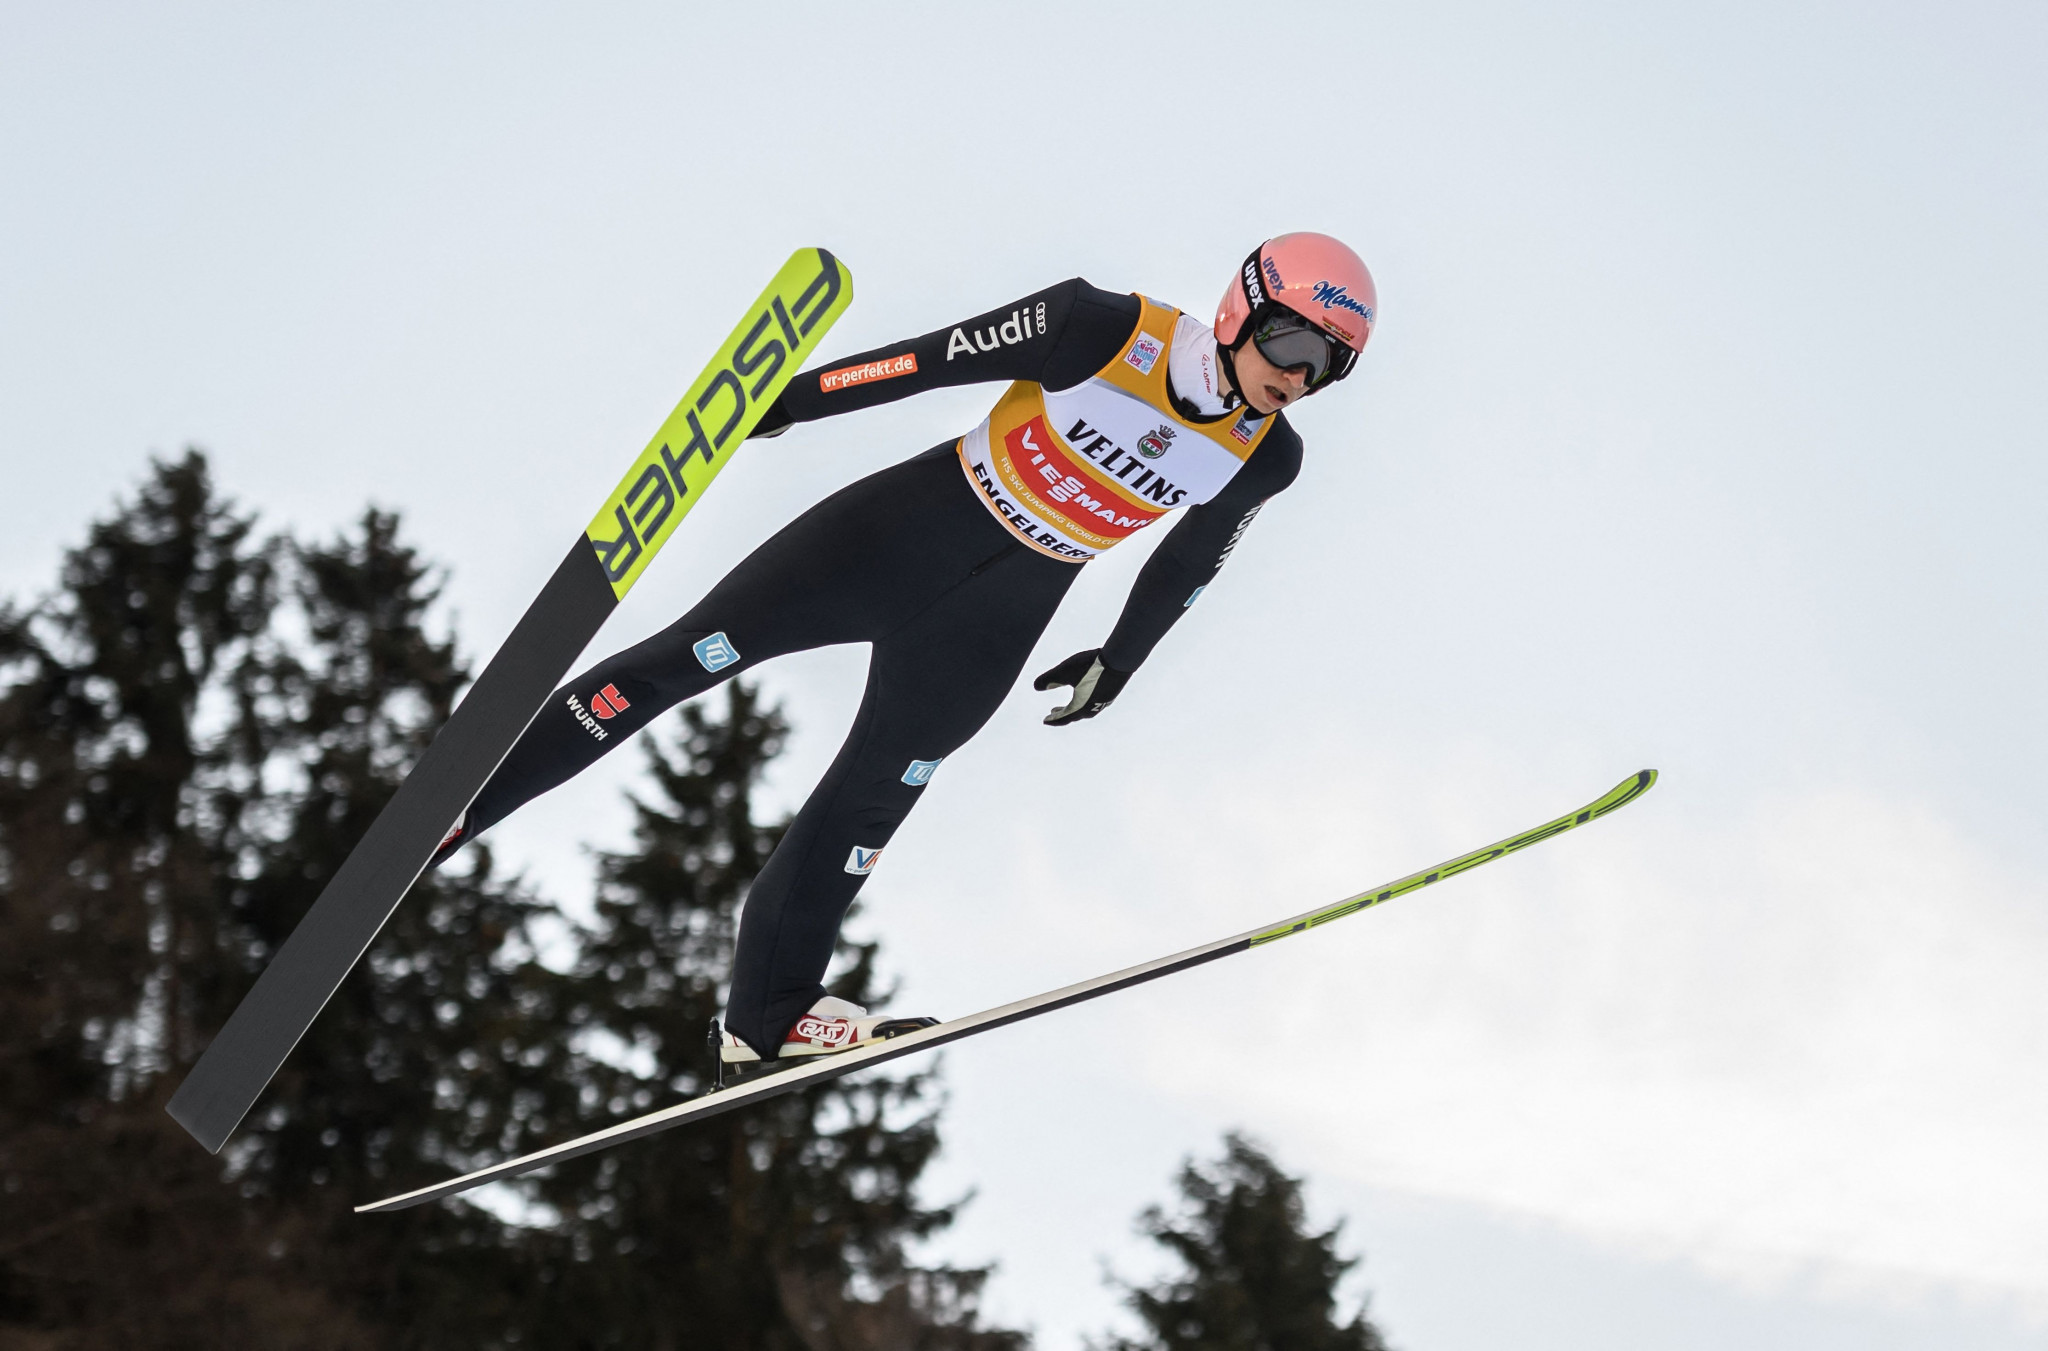 Karl Geiger scored 287.4 points to win gold in Engelberg ©Getty Images